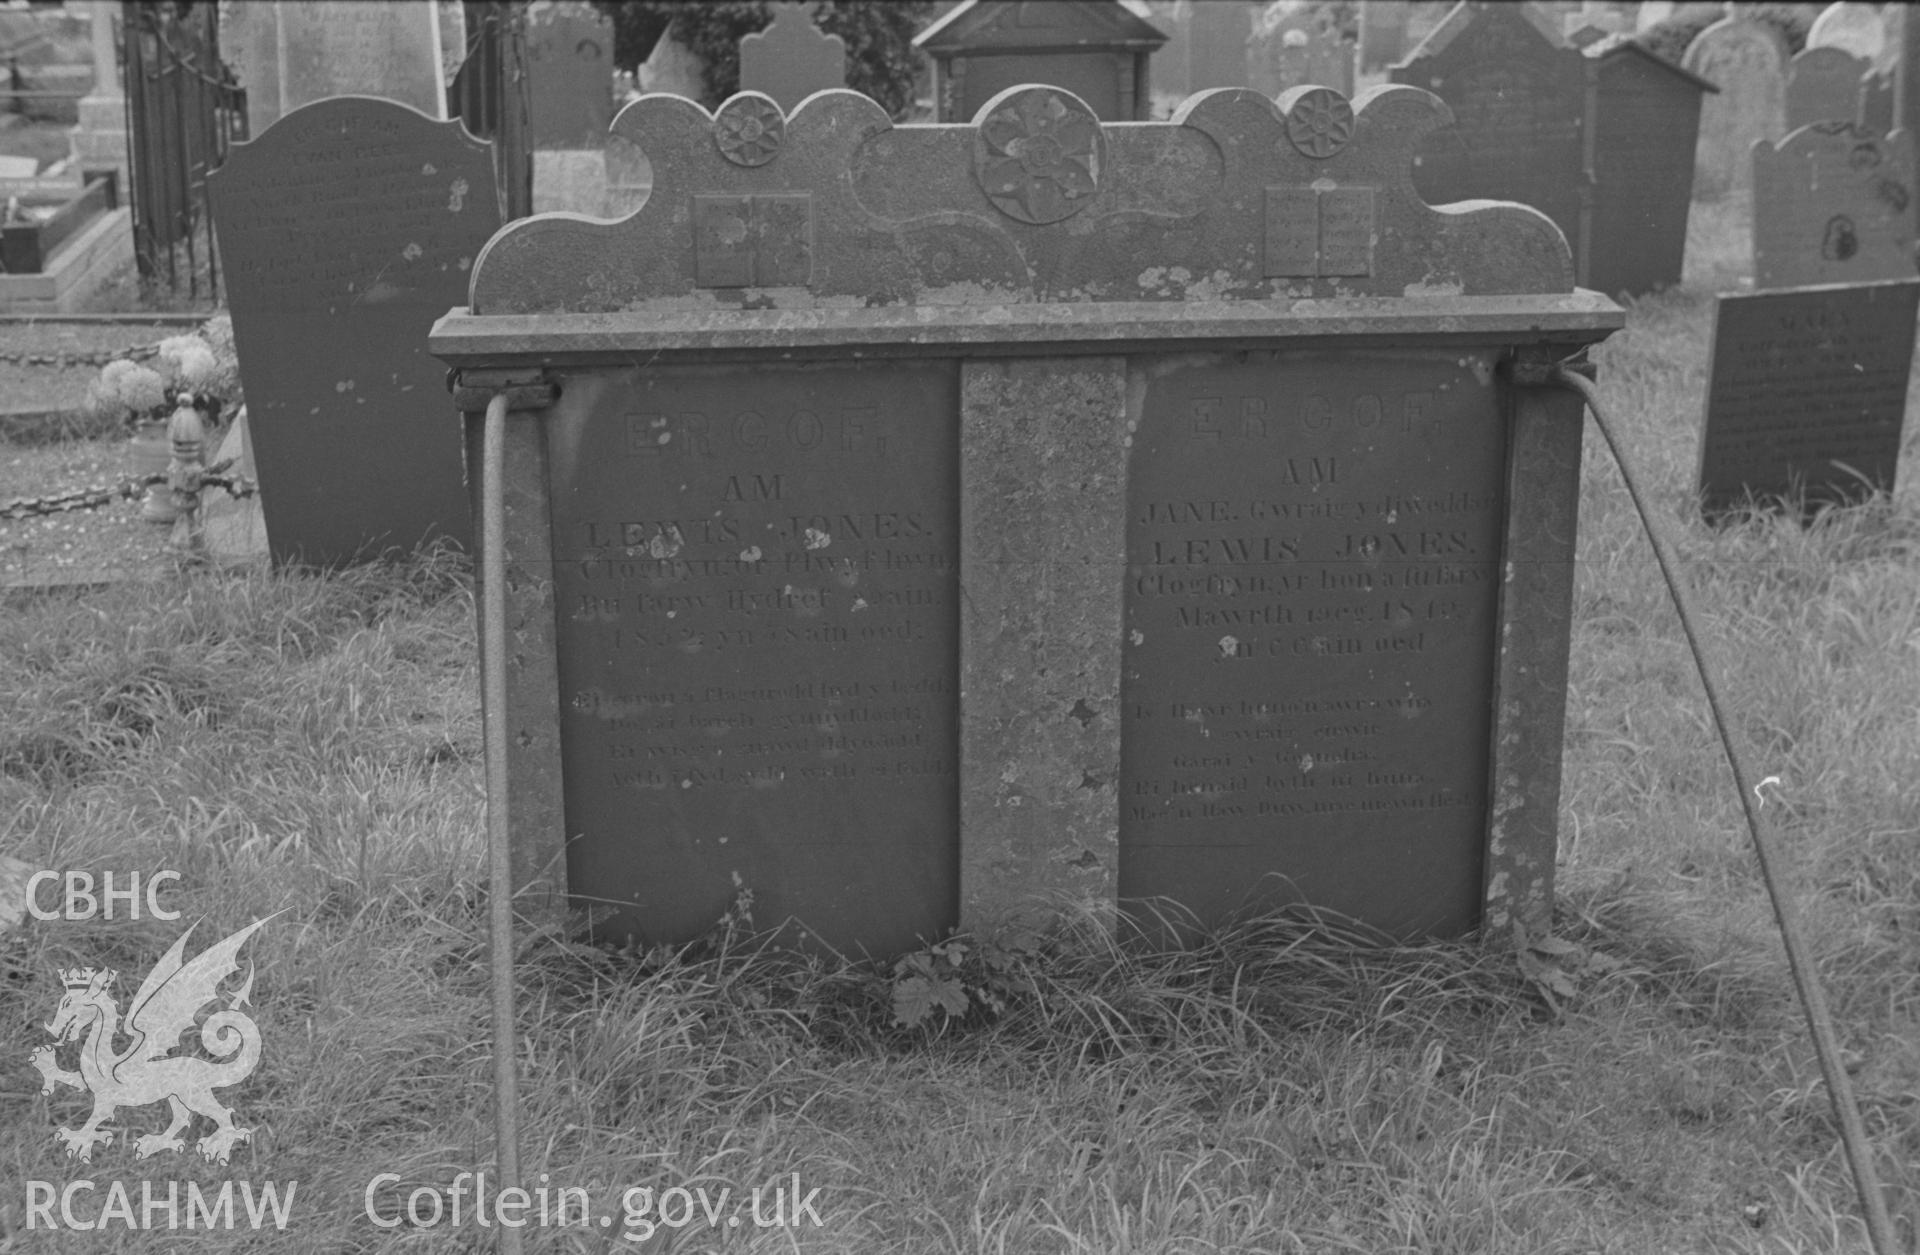 Digital copy of a black and white negative showing gravestones to the memory of Lewis and Jane Jones, at St. David's Church, Henfynyw, Aberaeron. Photographed by Arthur O. Chater on 5th September 1966 from Grid Reference SN 447 613.